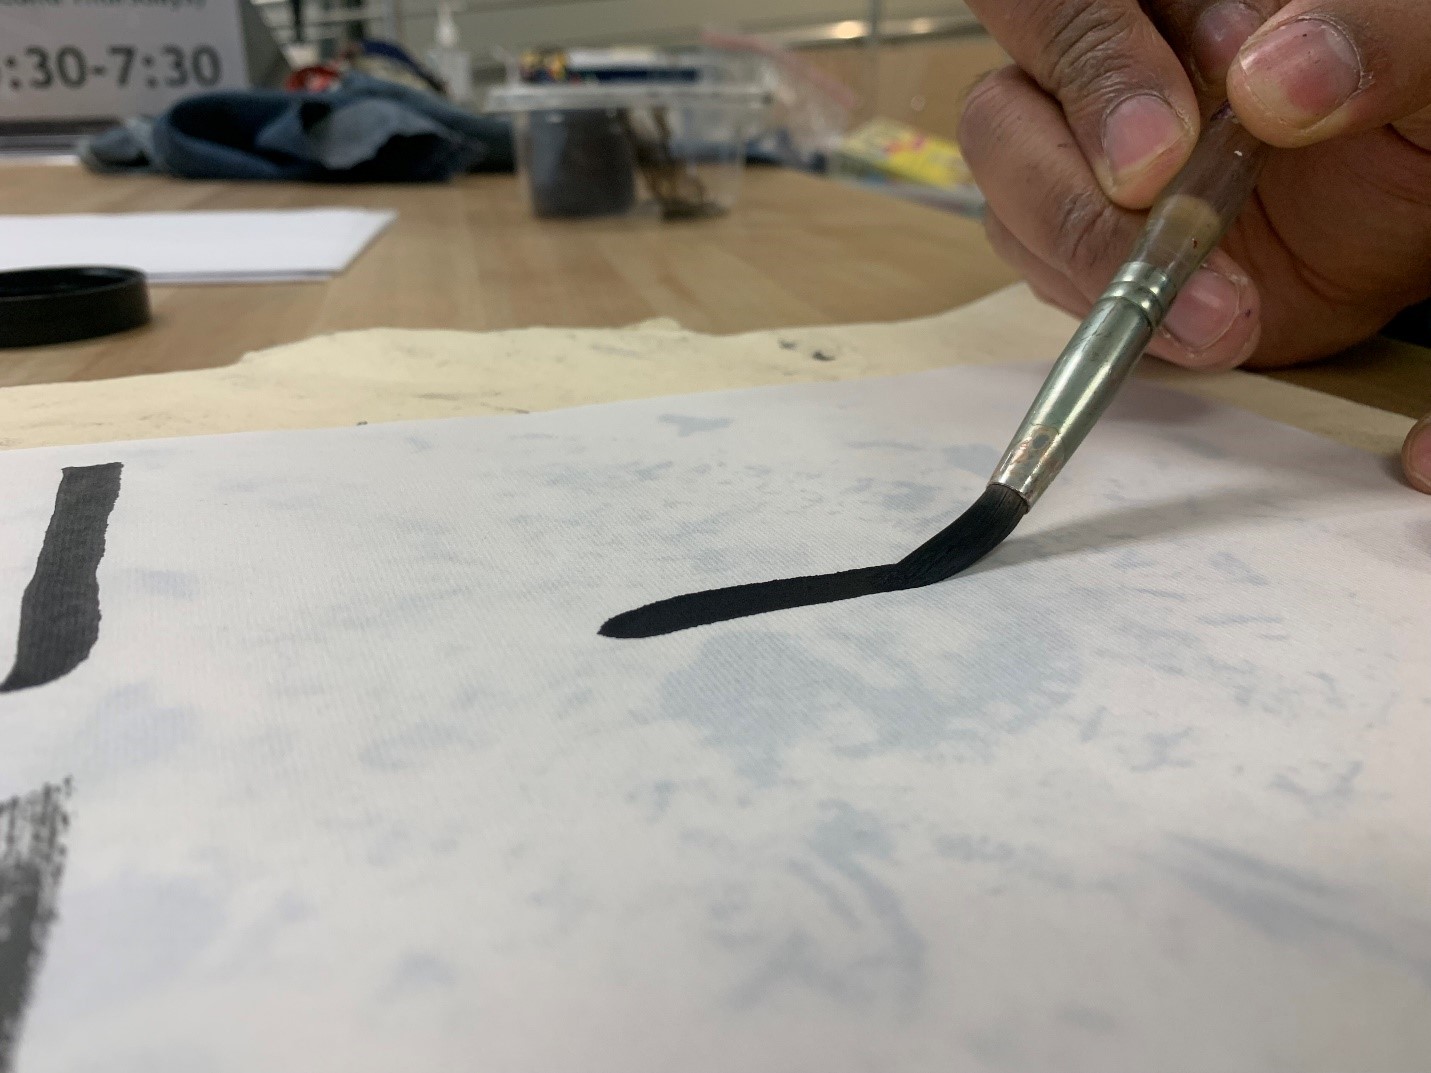 A calligraphy brush making a black mark of ink on a piece of paper.